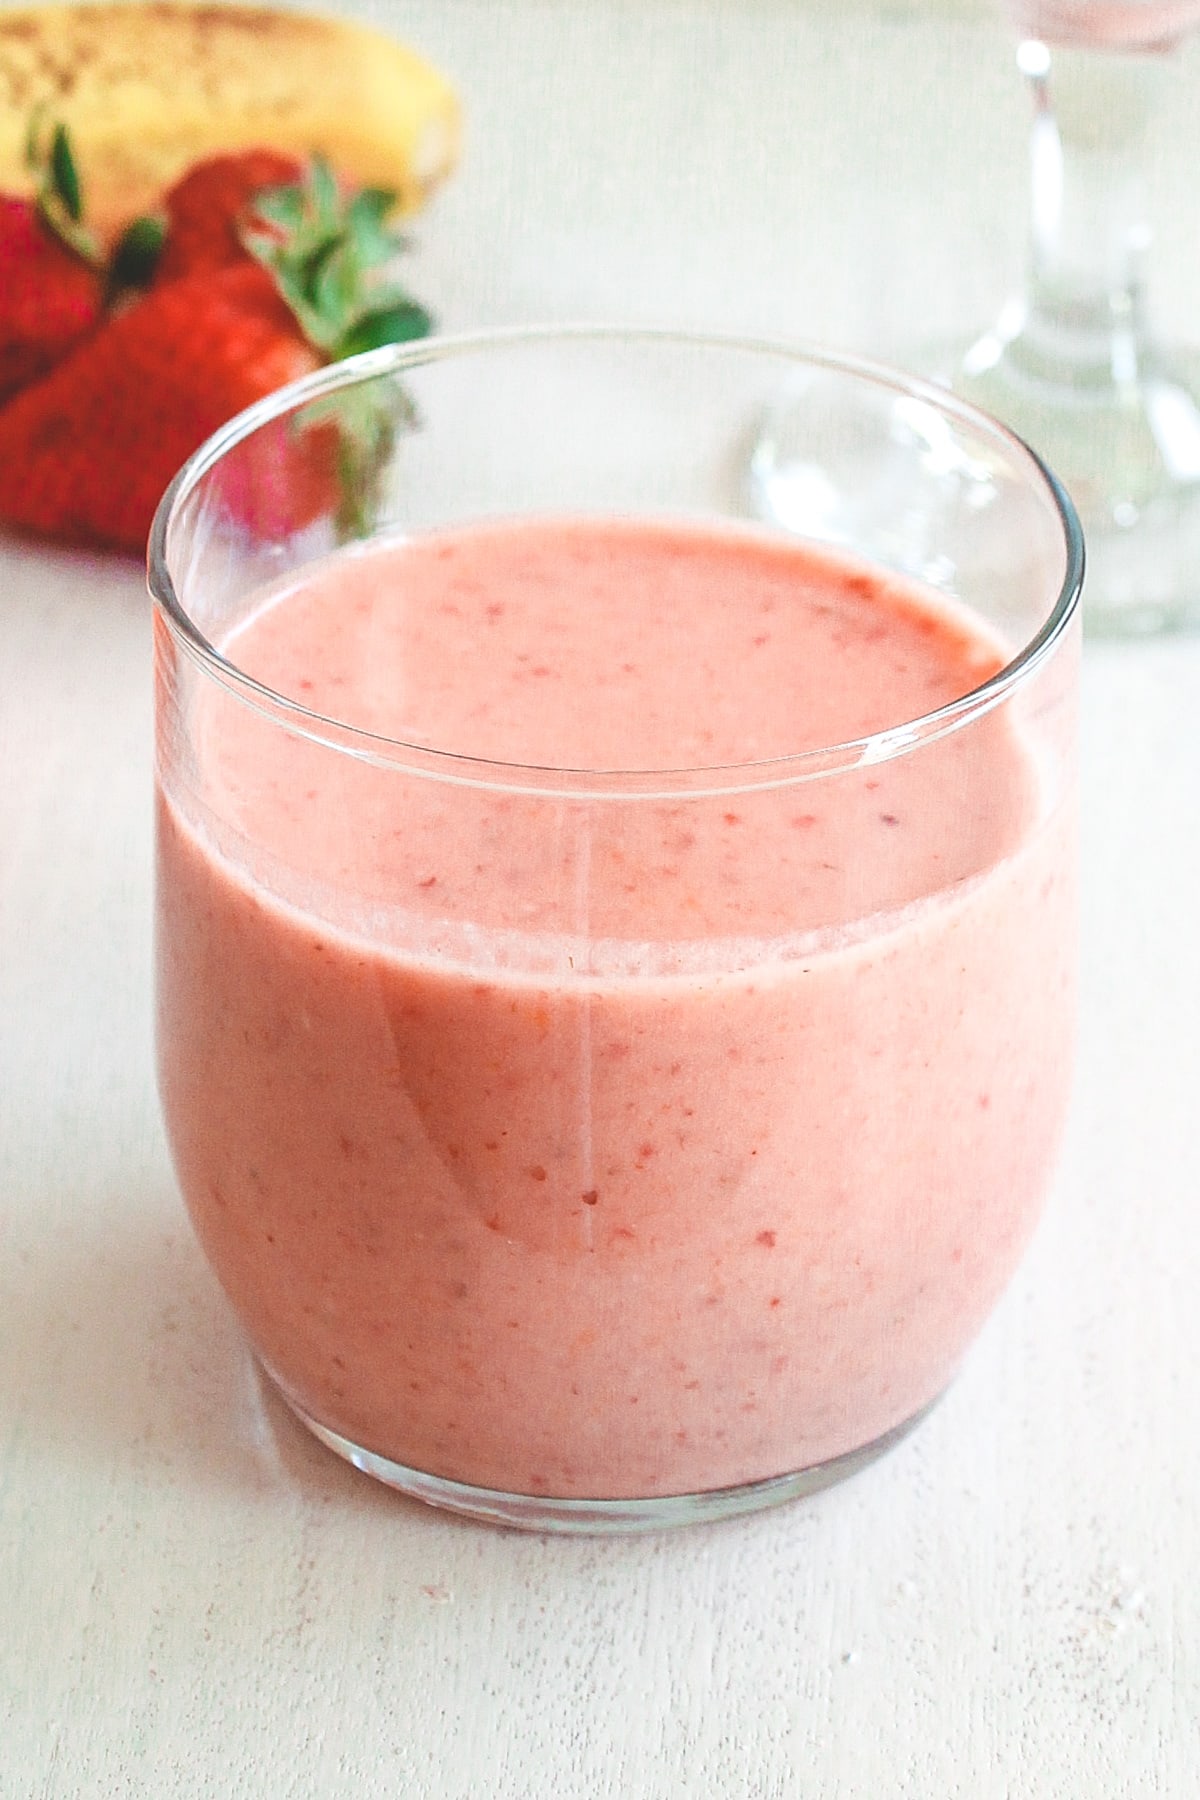 A glass of strawberry banana smoothie with banana and strawberries in the back.